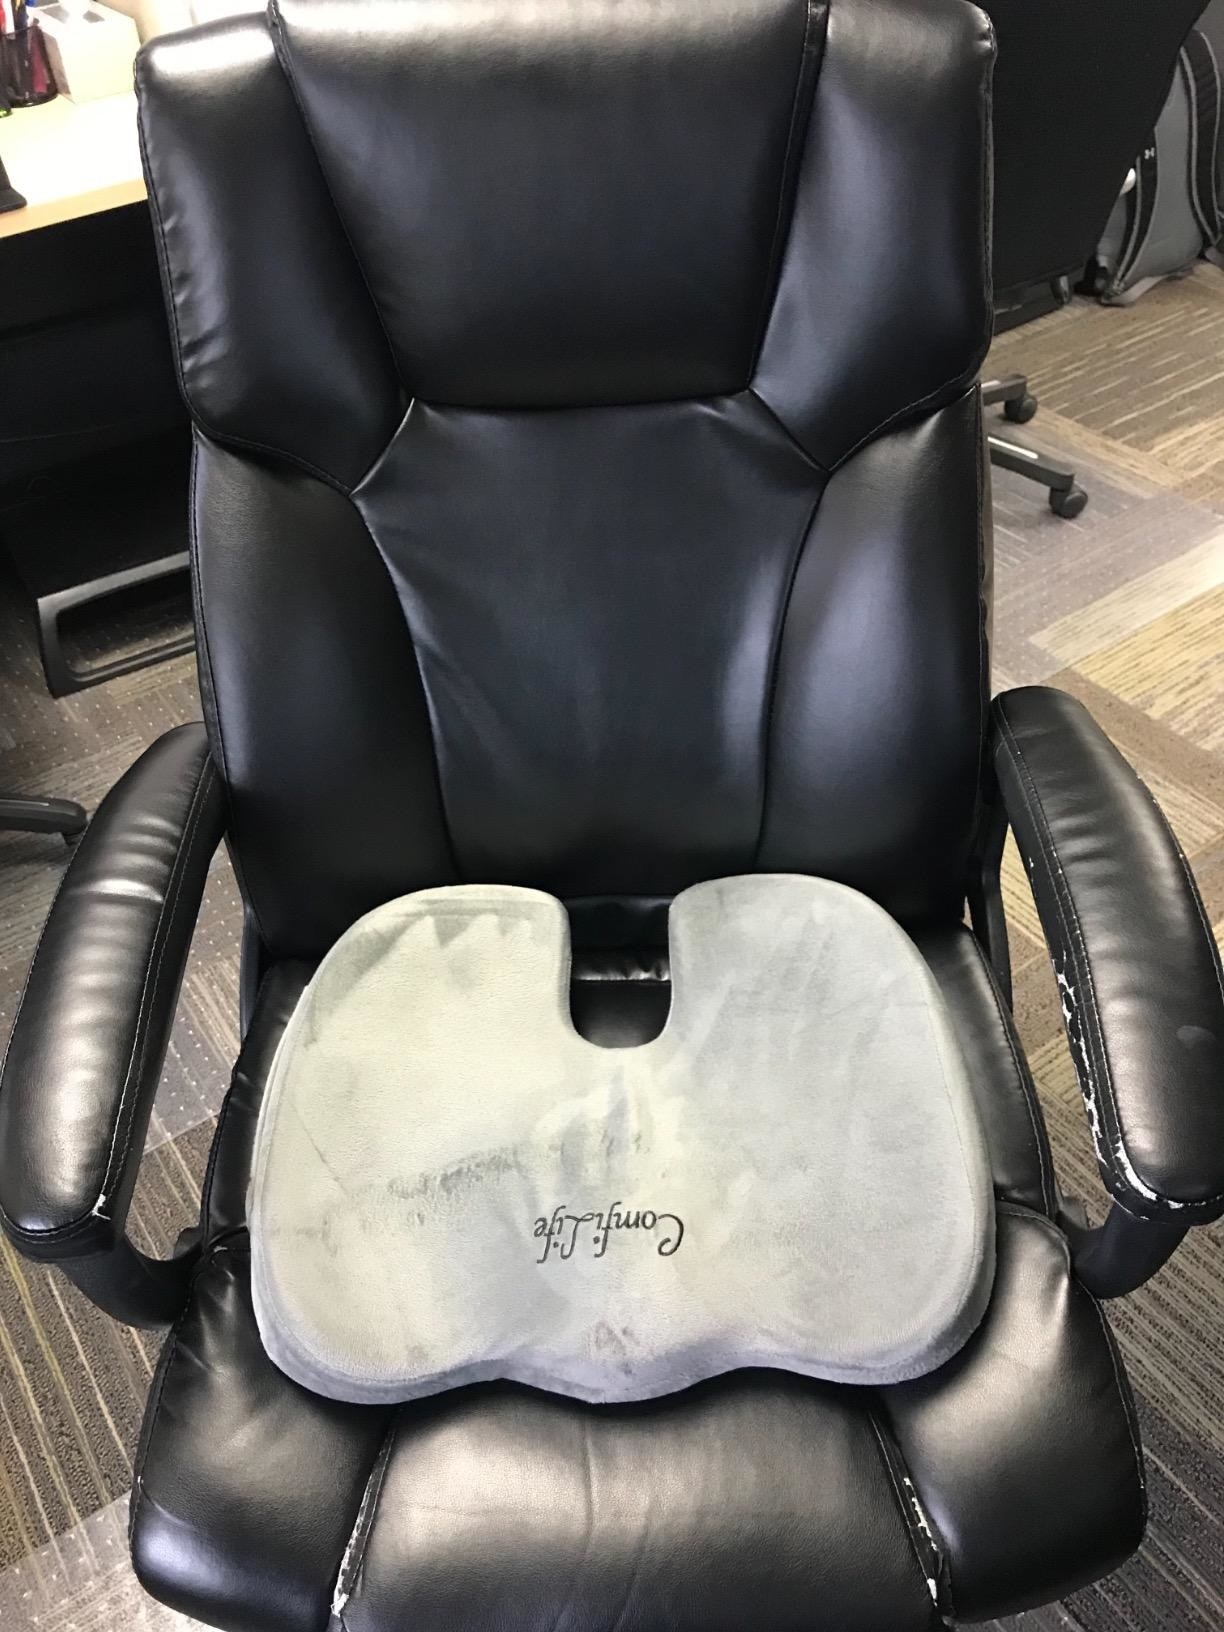 Reviewer&#x27;s photo of the cushion on office chair